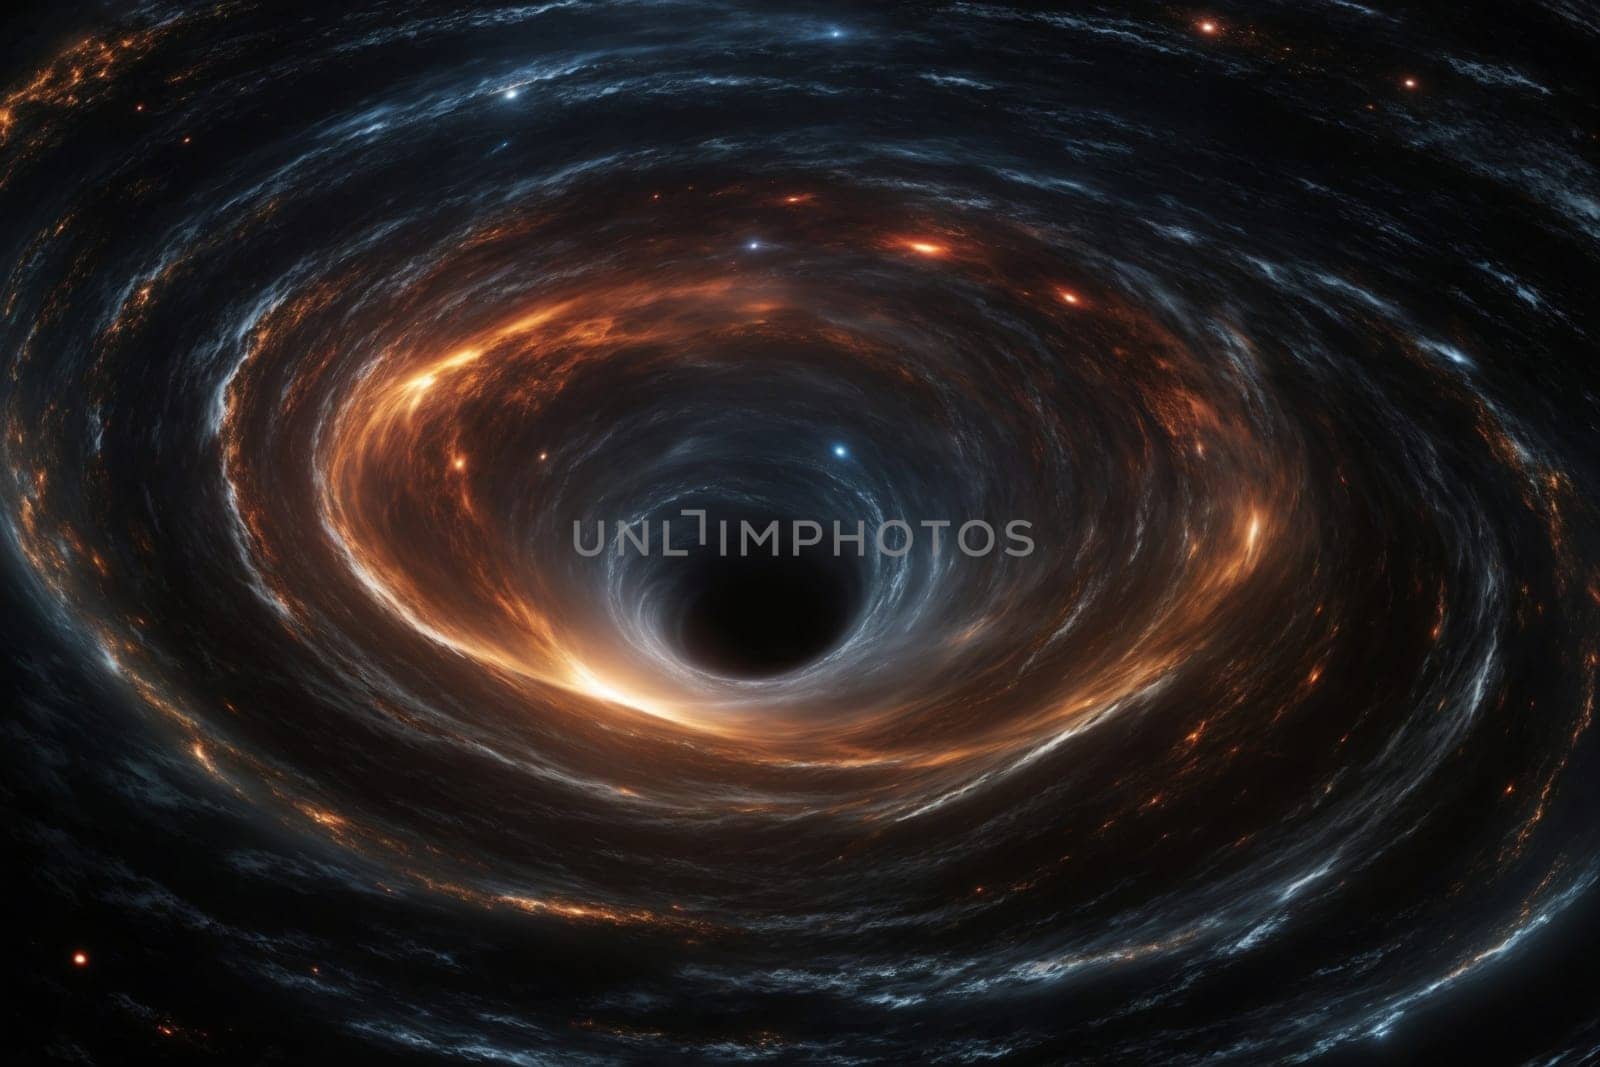 A photo showing a black hole, a region of spacetime exhibiting gravitational effects so strong that nothing can escape its pull, located at the center of the Milky Way galaxy.